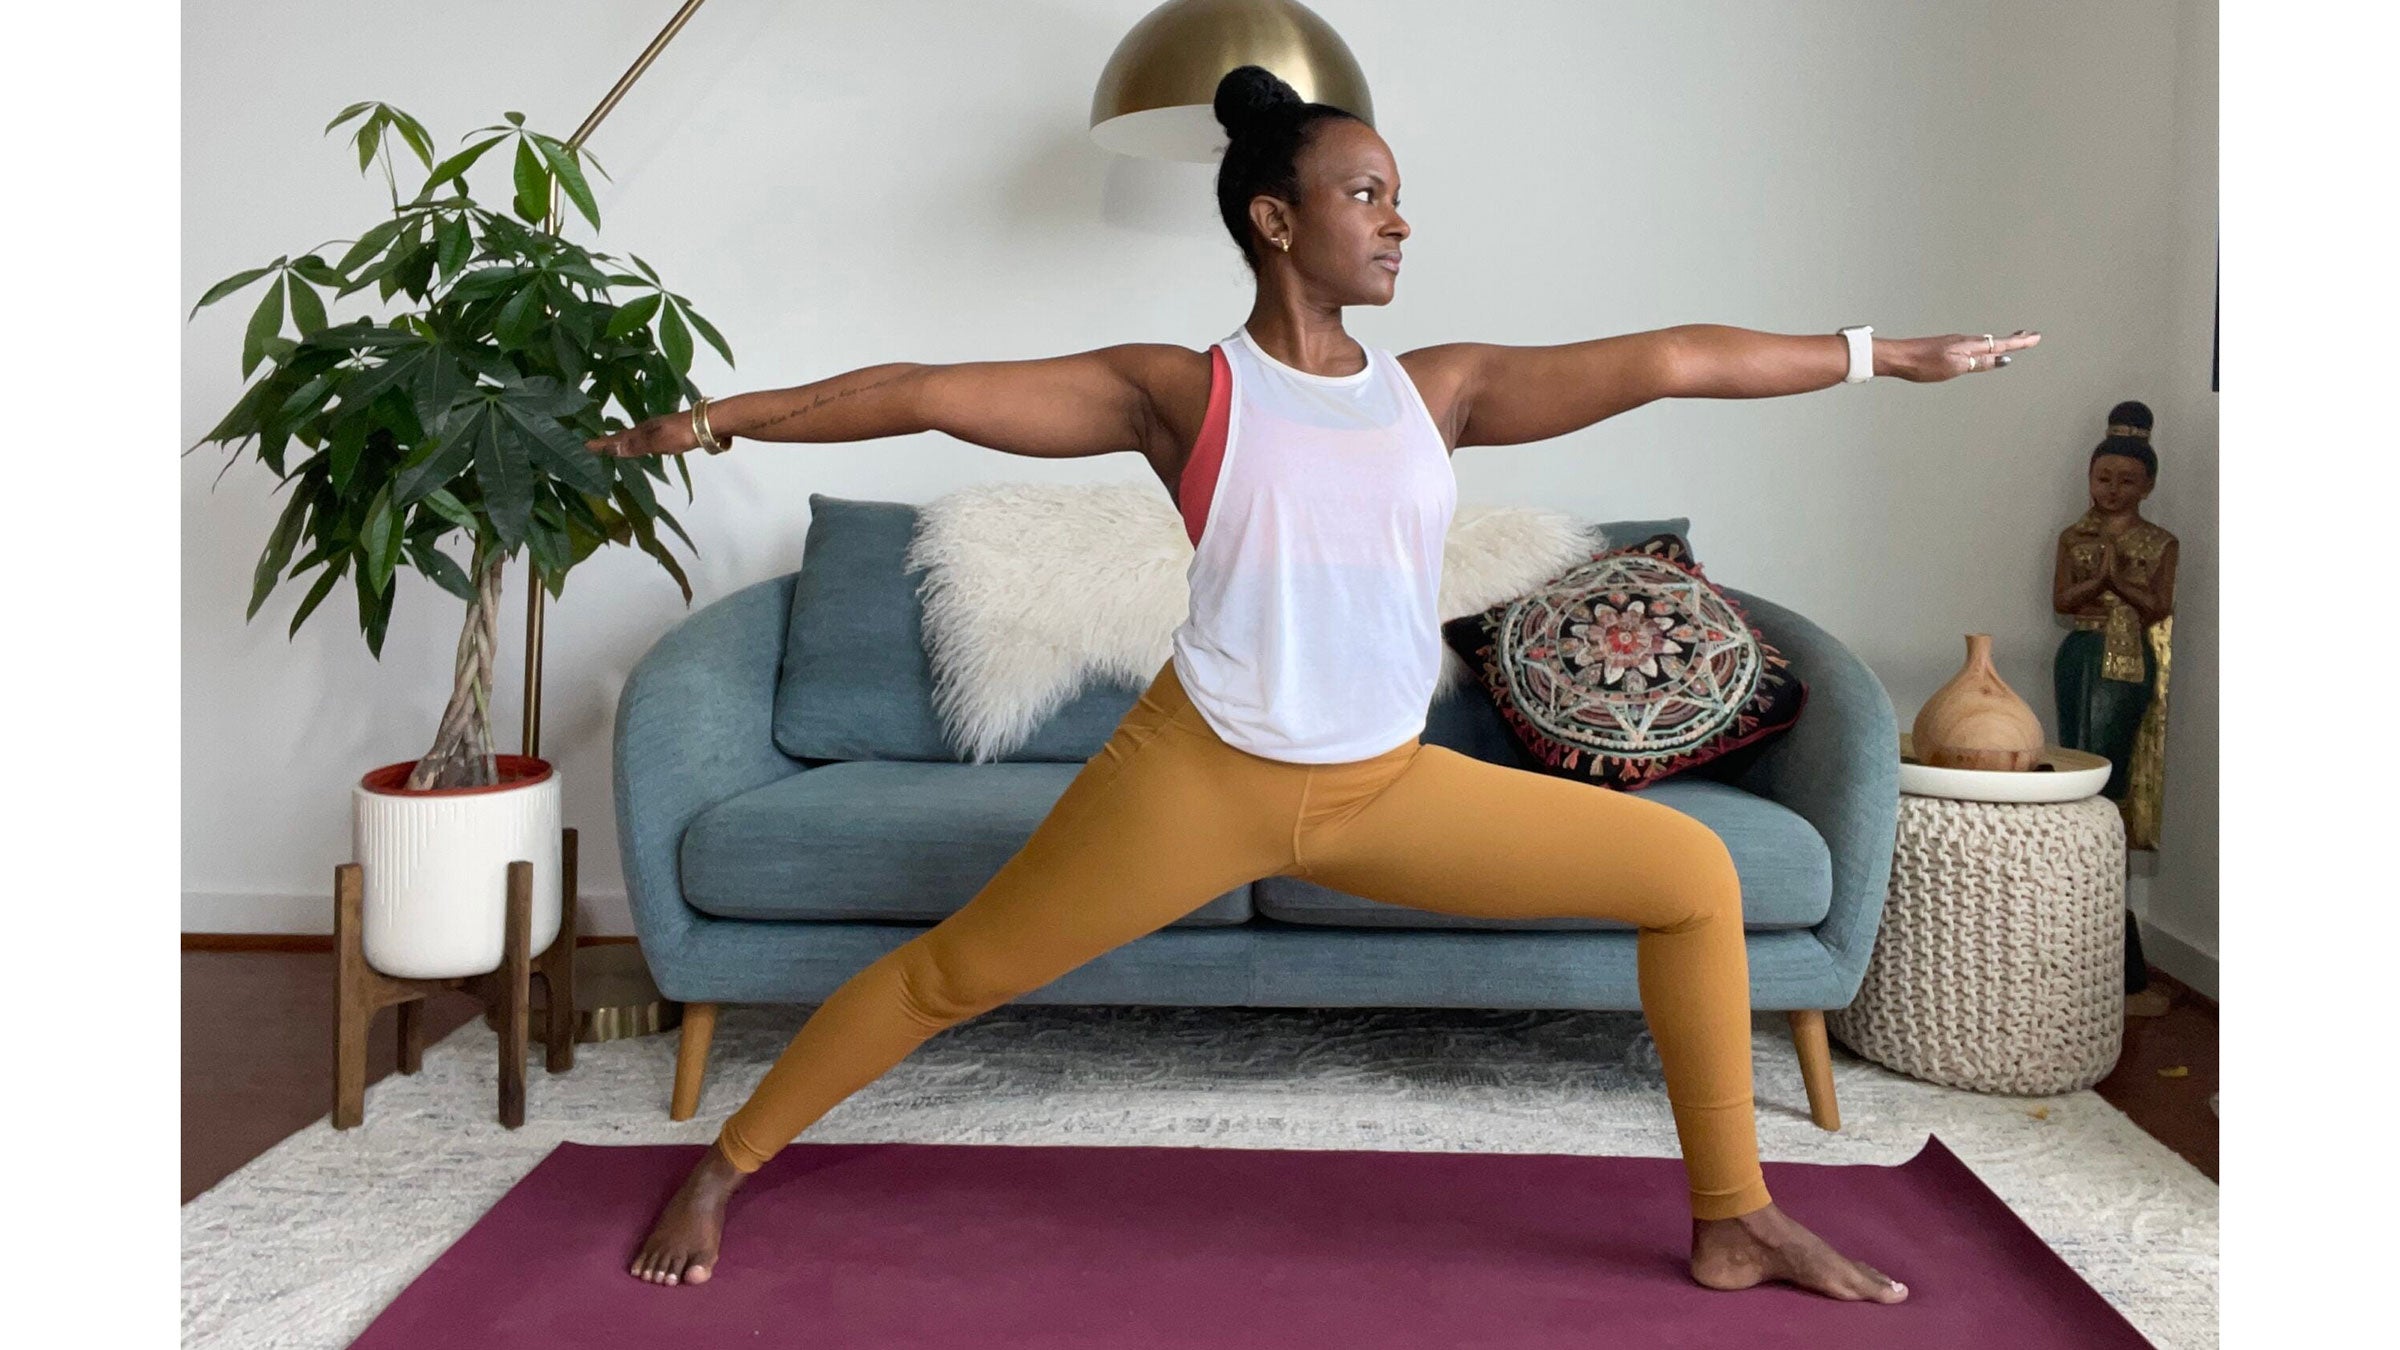 A Yoga Sequence to Uplift Your Heart & Spark Joy - Yoga Journal